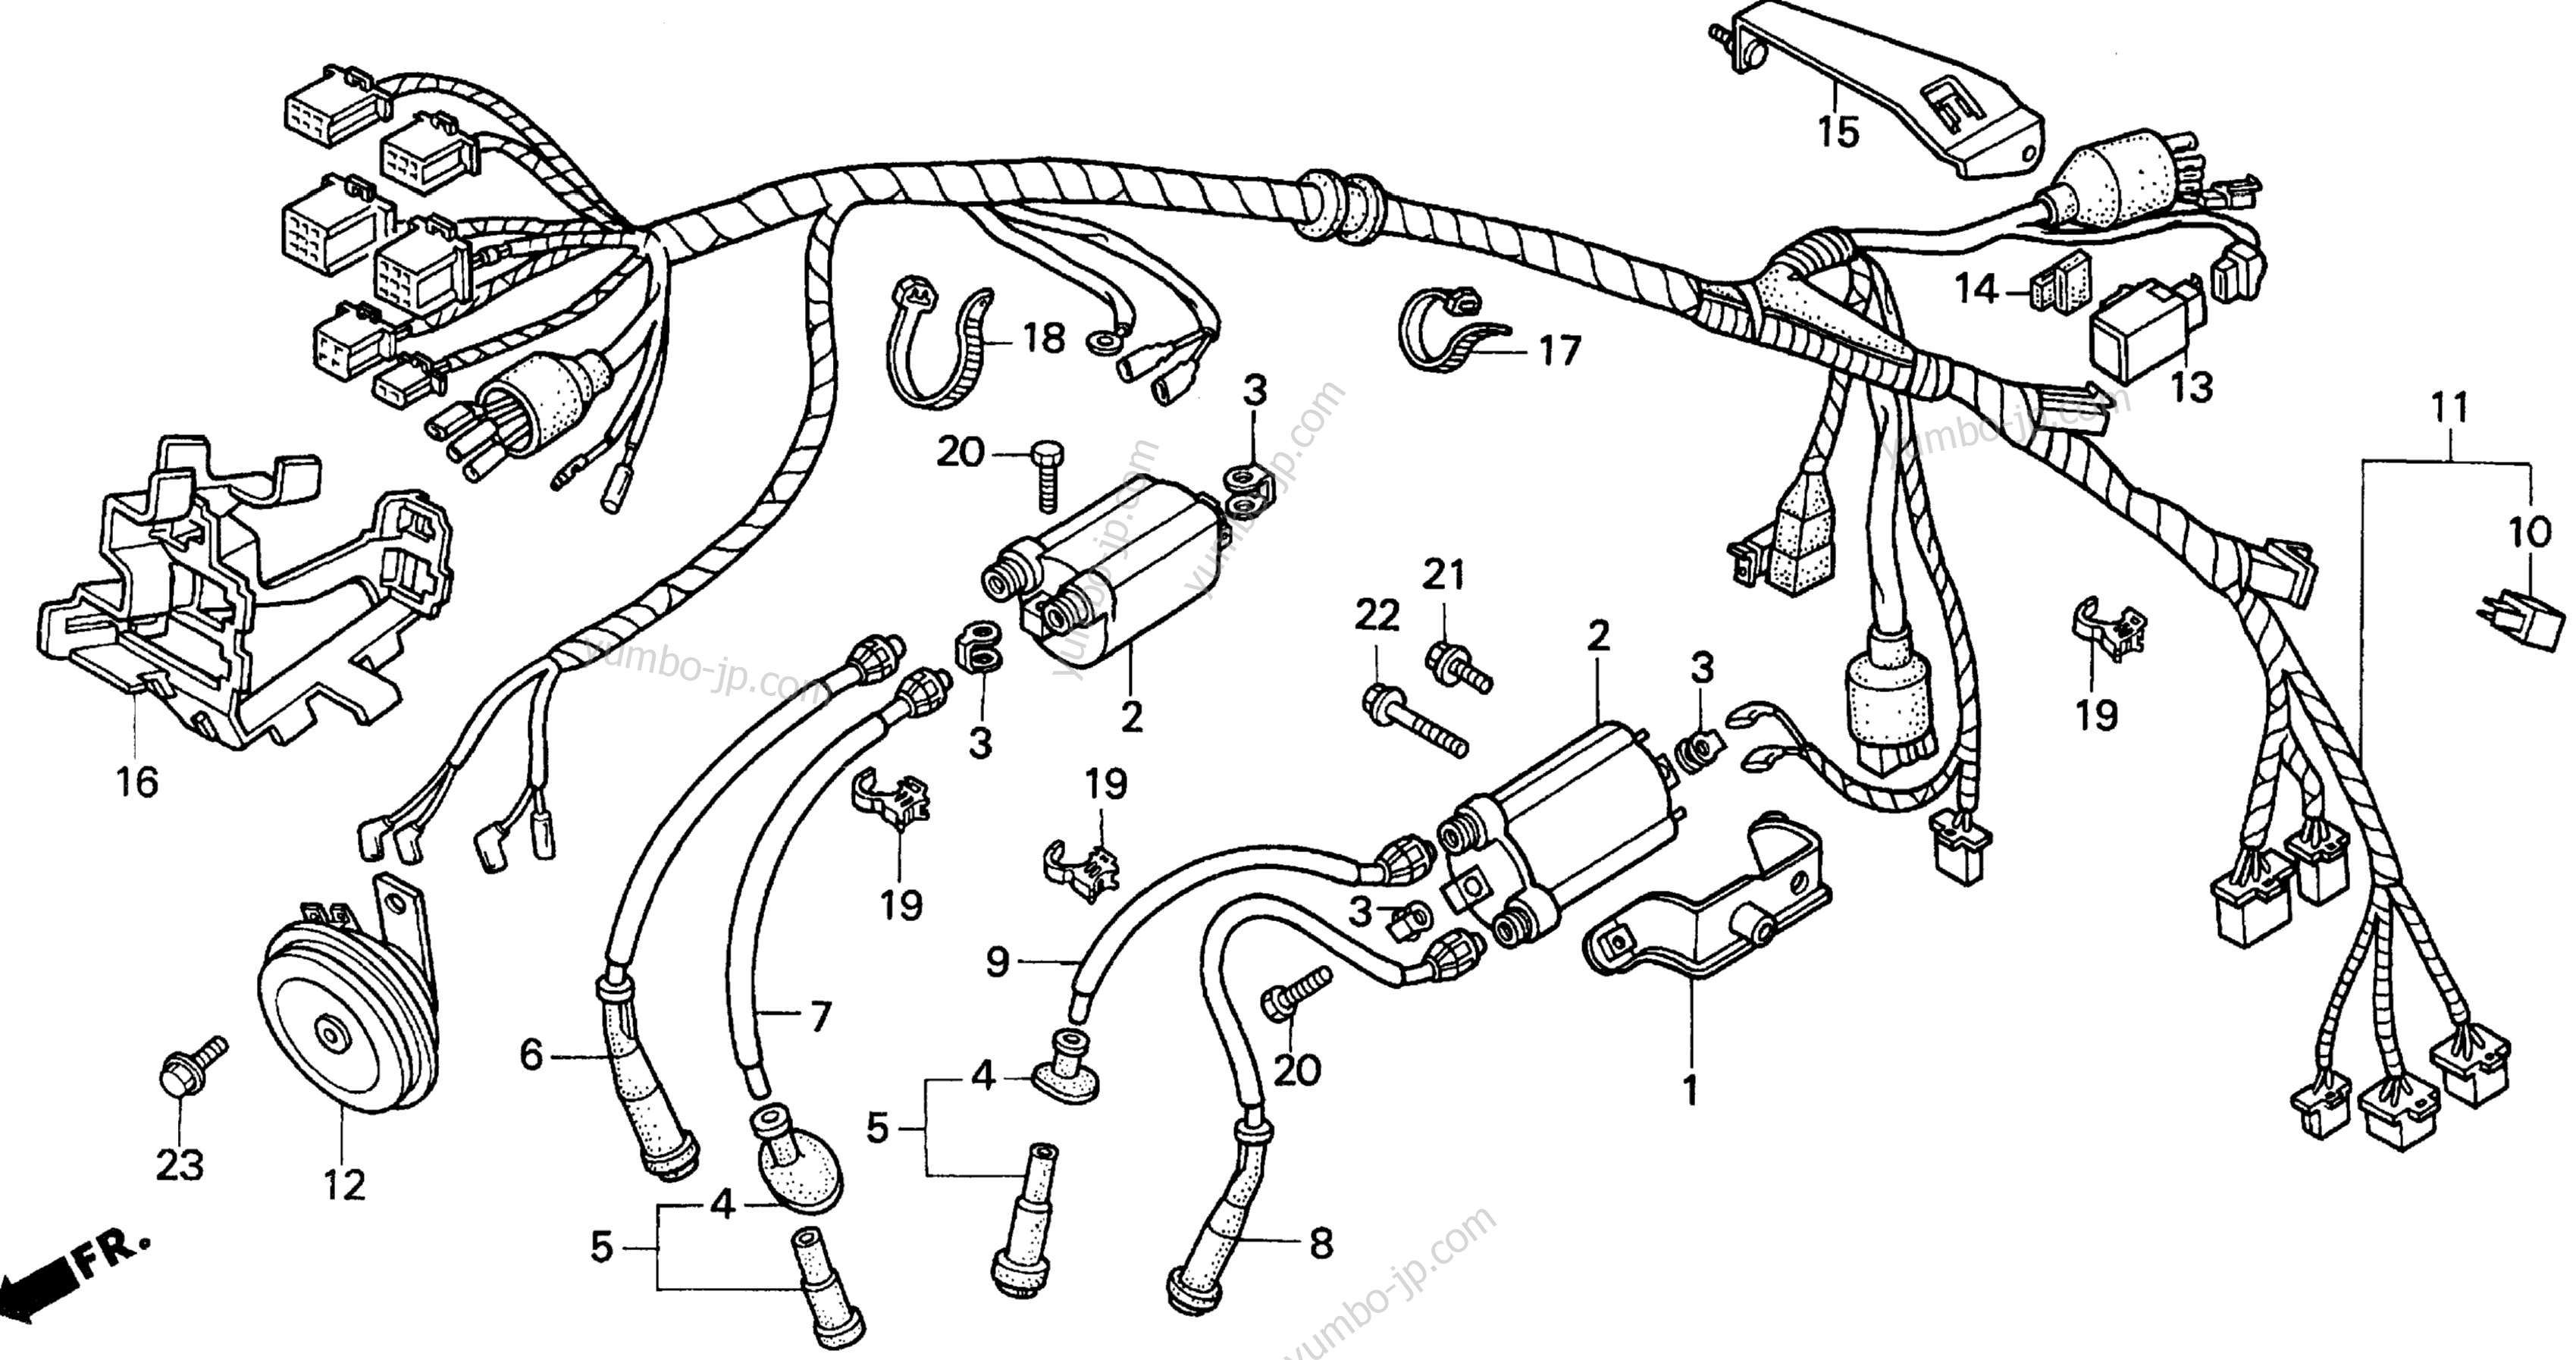 WIRE HARNESS for motorcycles HONDA VT600CD A 1999 year